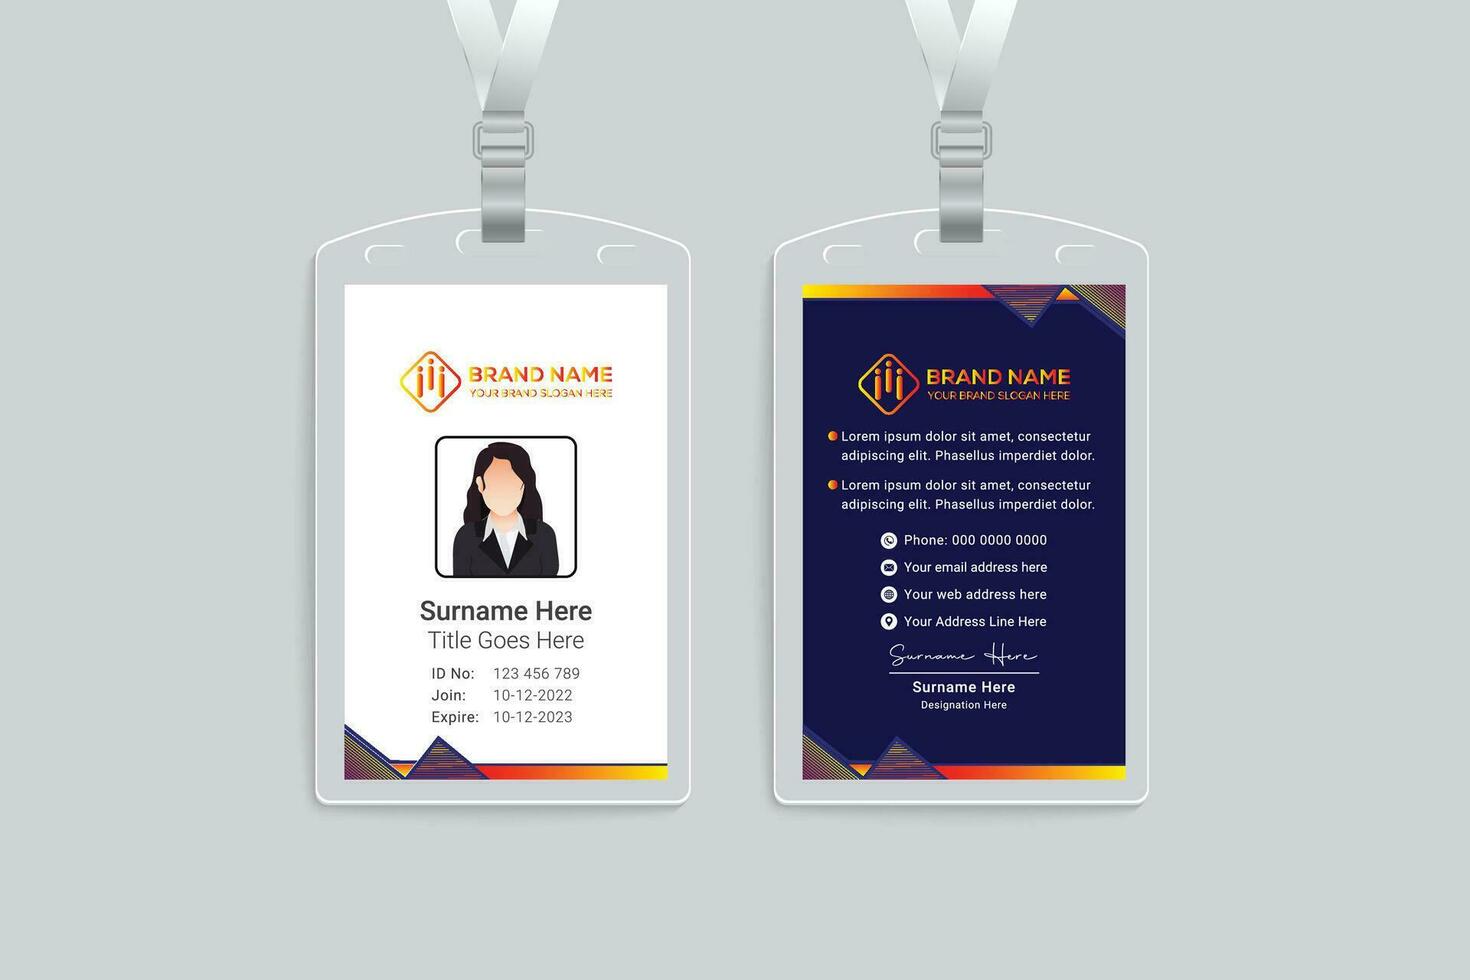 Clean style modern id card template vector